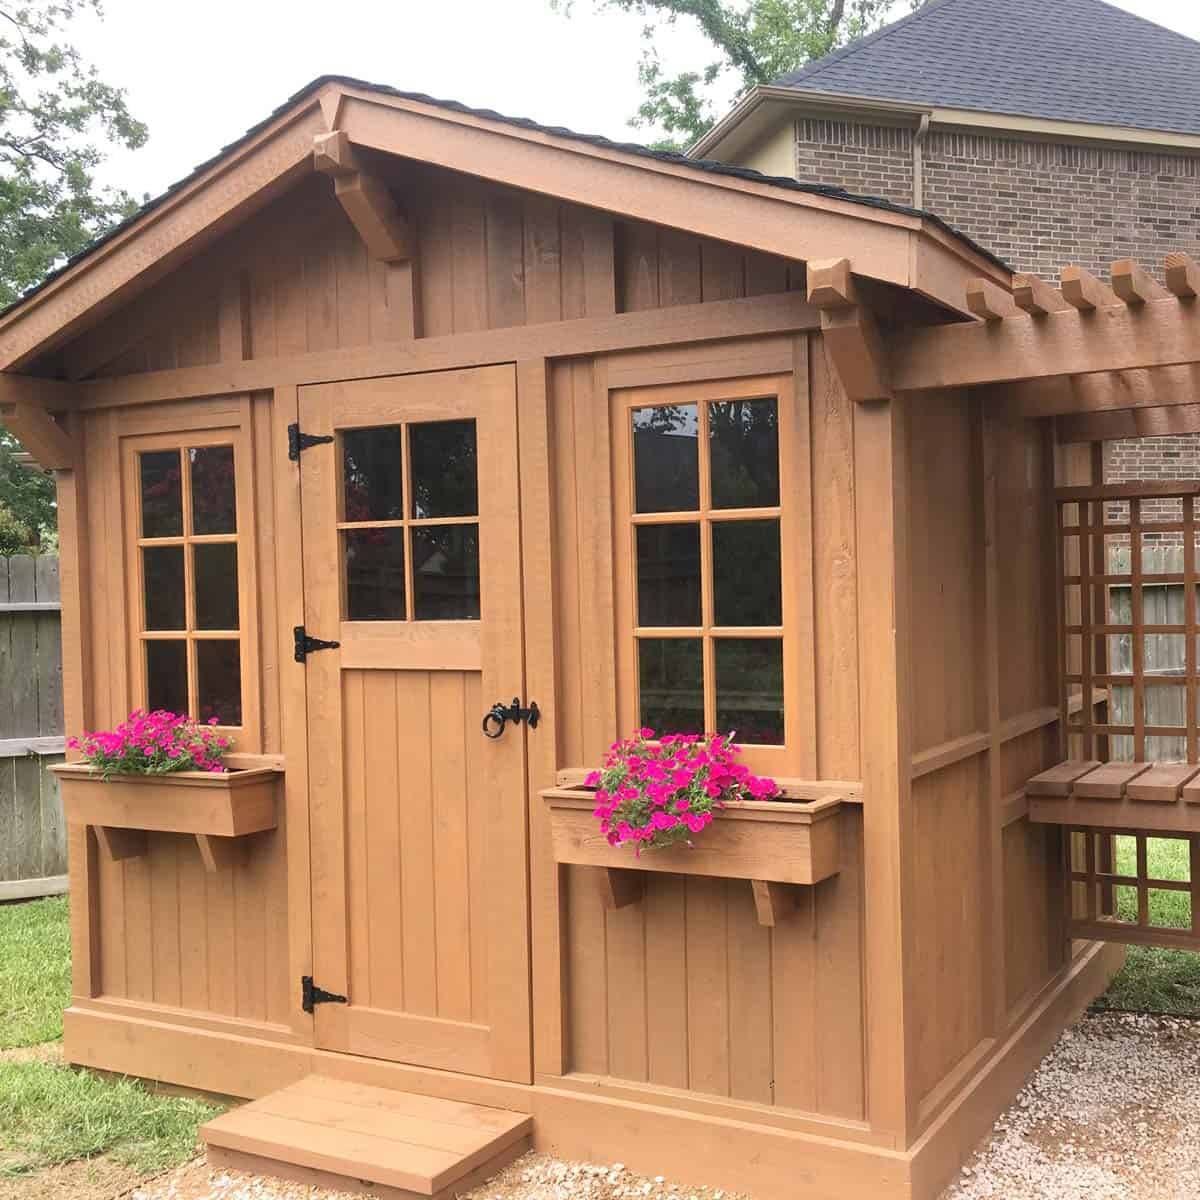 Wooden Garden Shed Plans